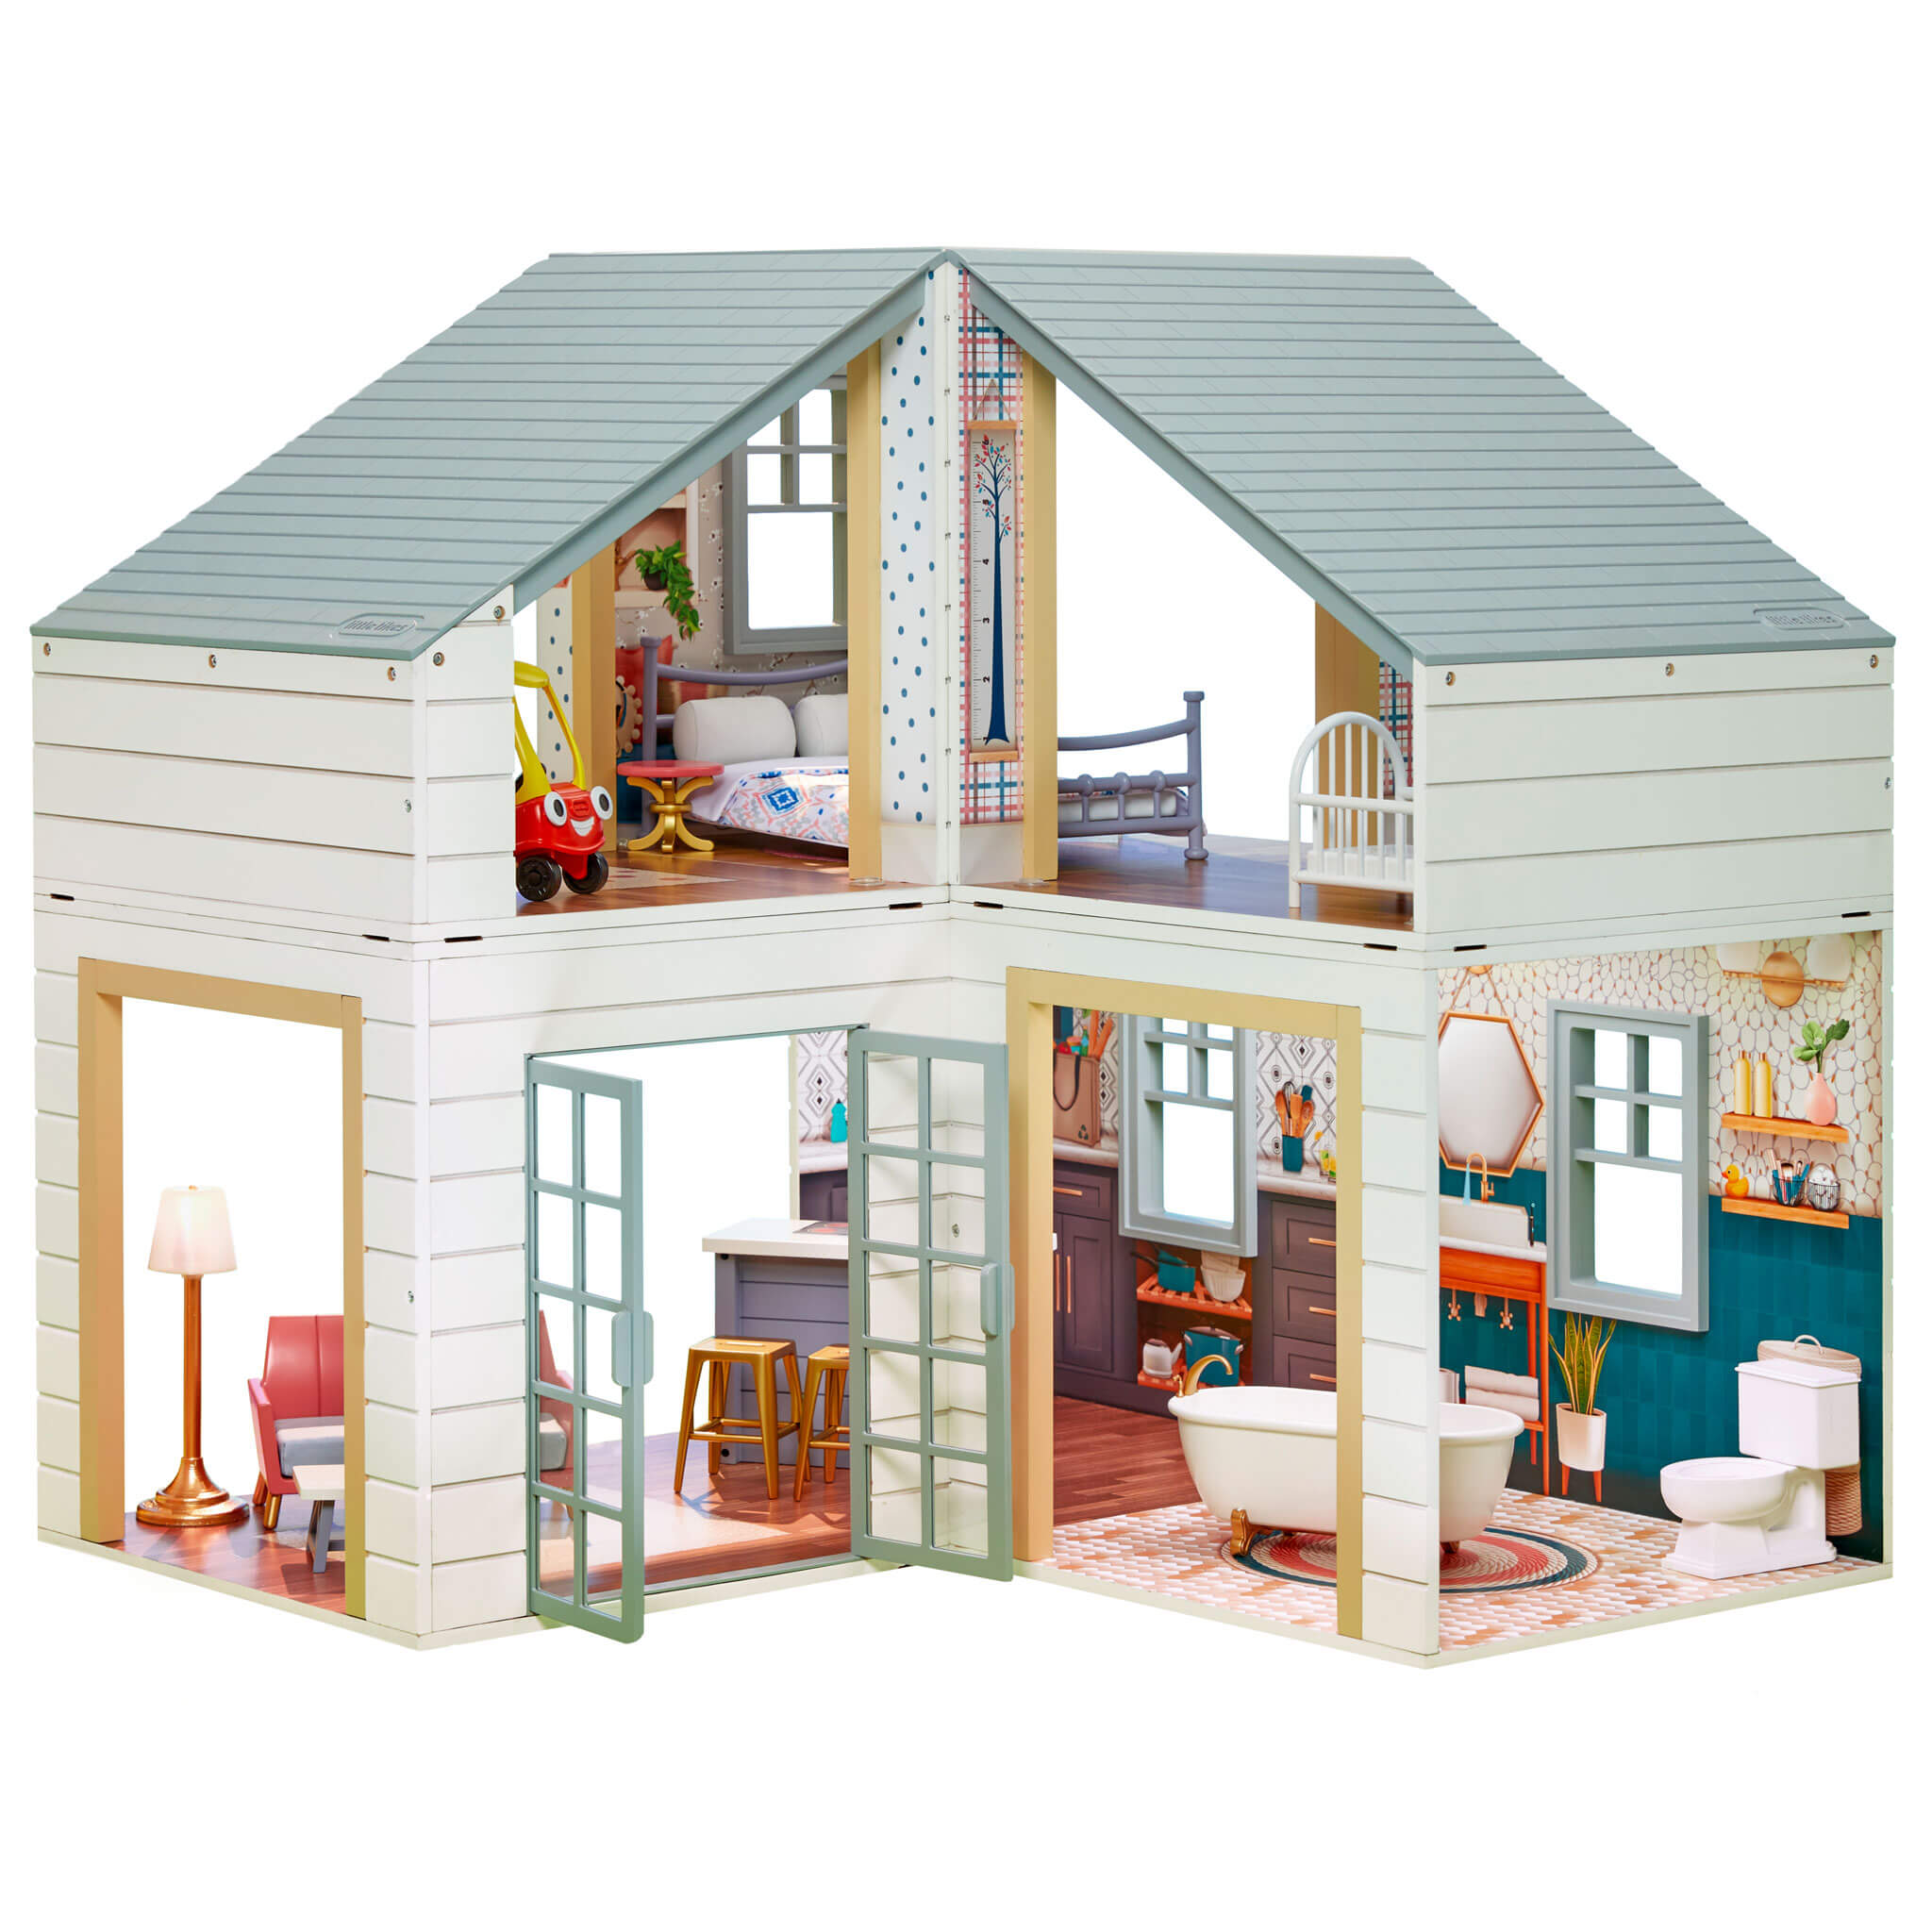 SMALL FOOT ICONIC DOLL HOUSE COMPLETE DOLLSET